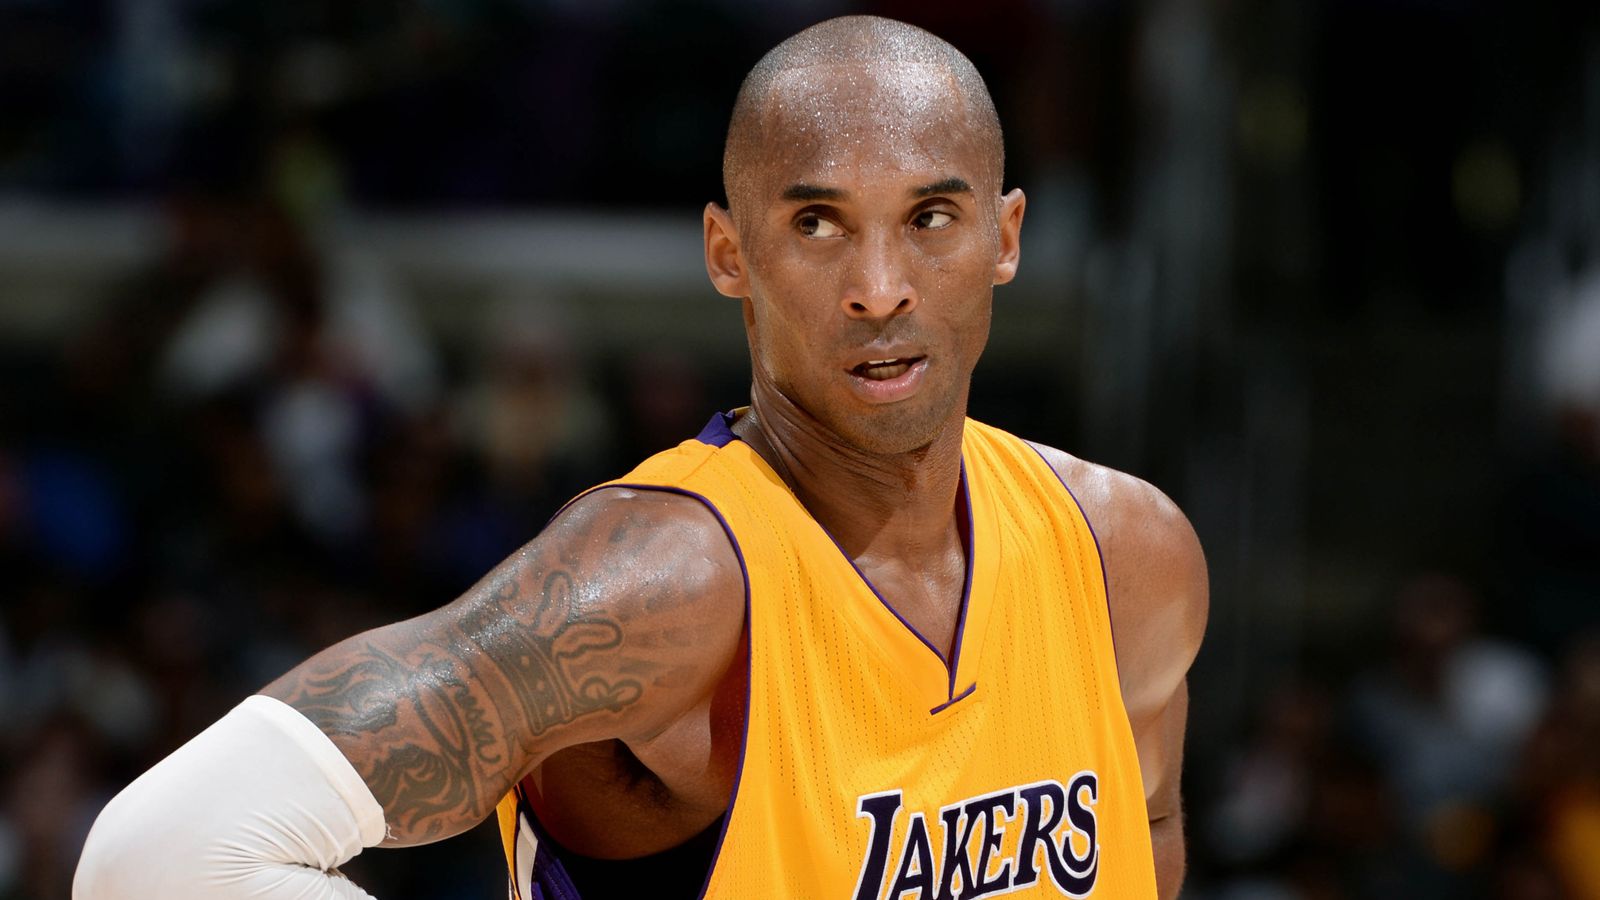 The Story of How Kobe Bryant Became a Los Angeles Laker